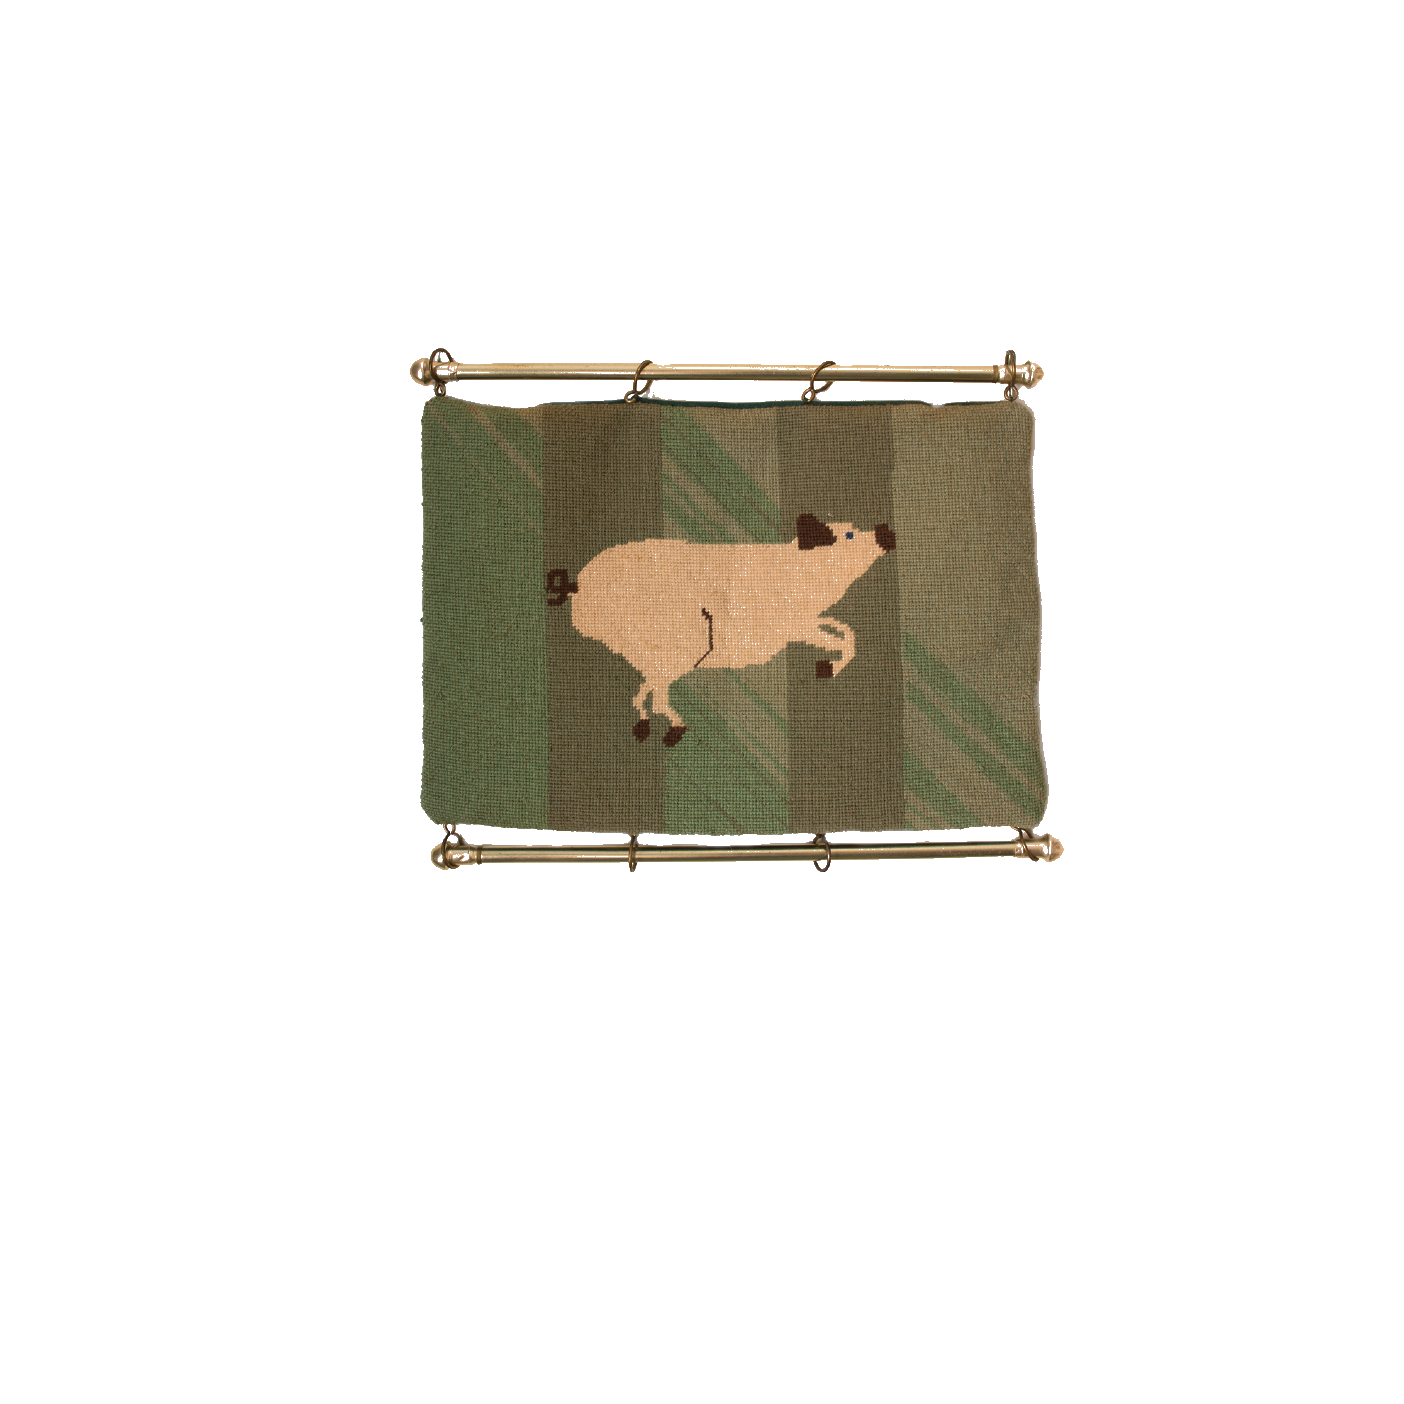 A green banner depicting a pink pig